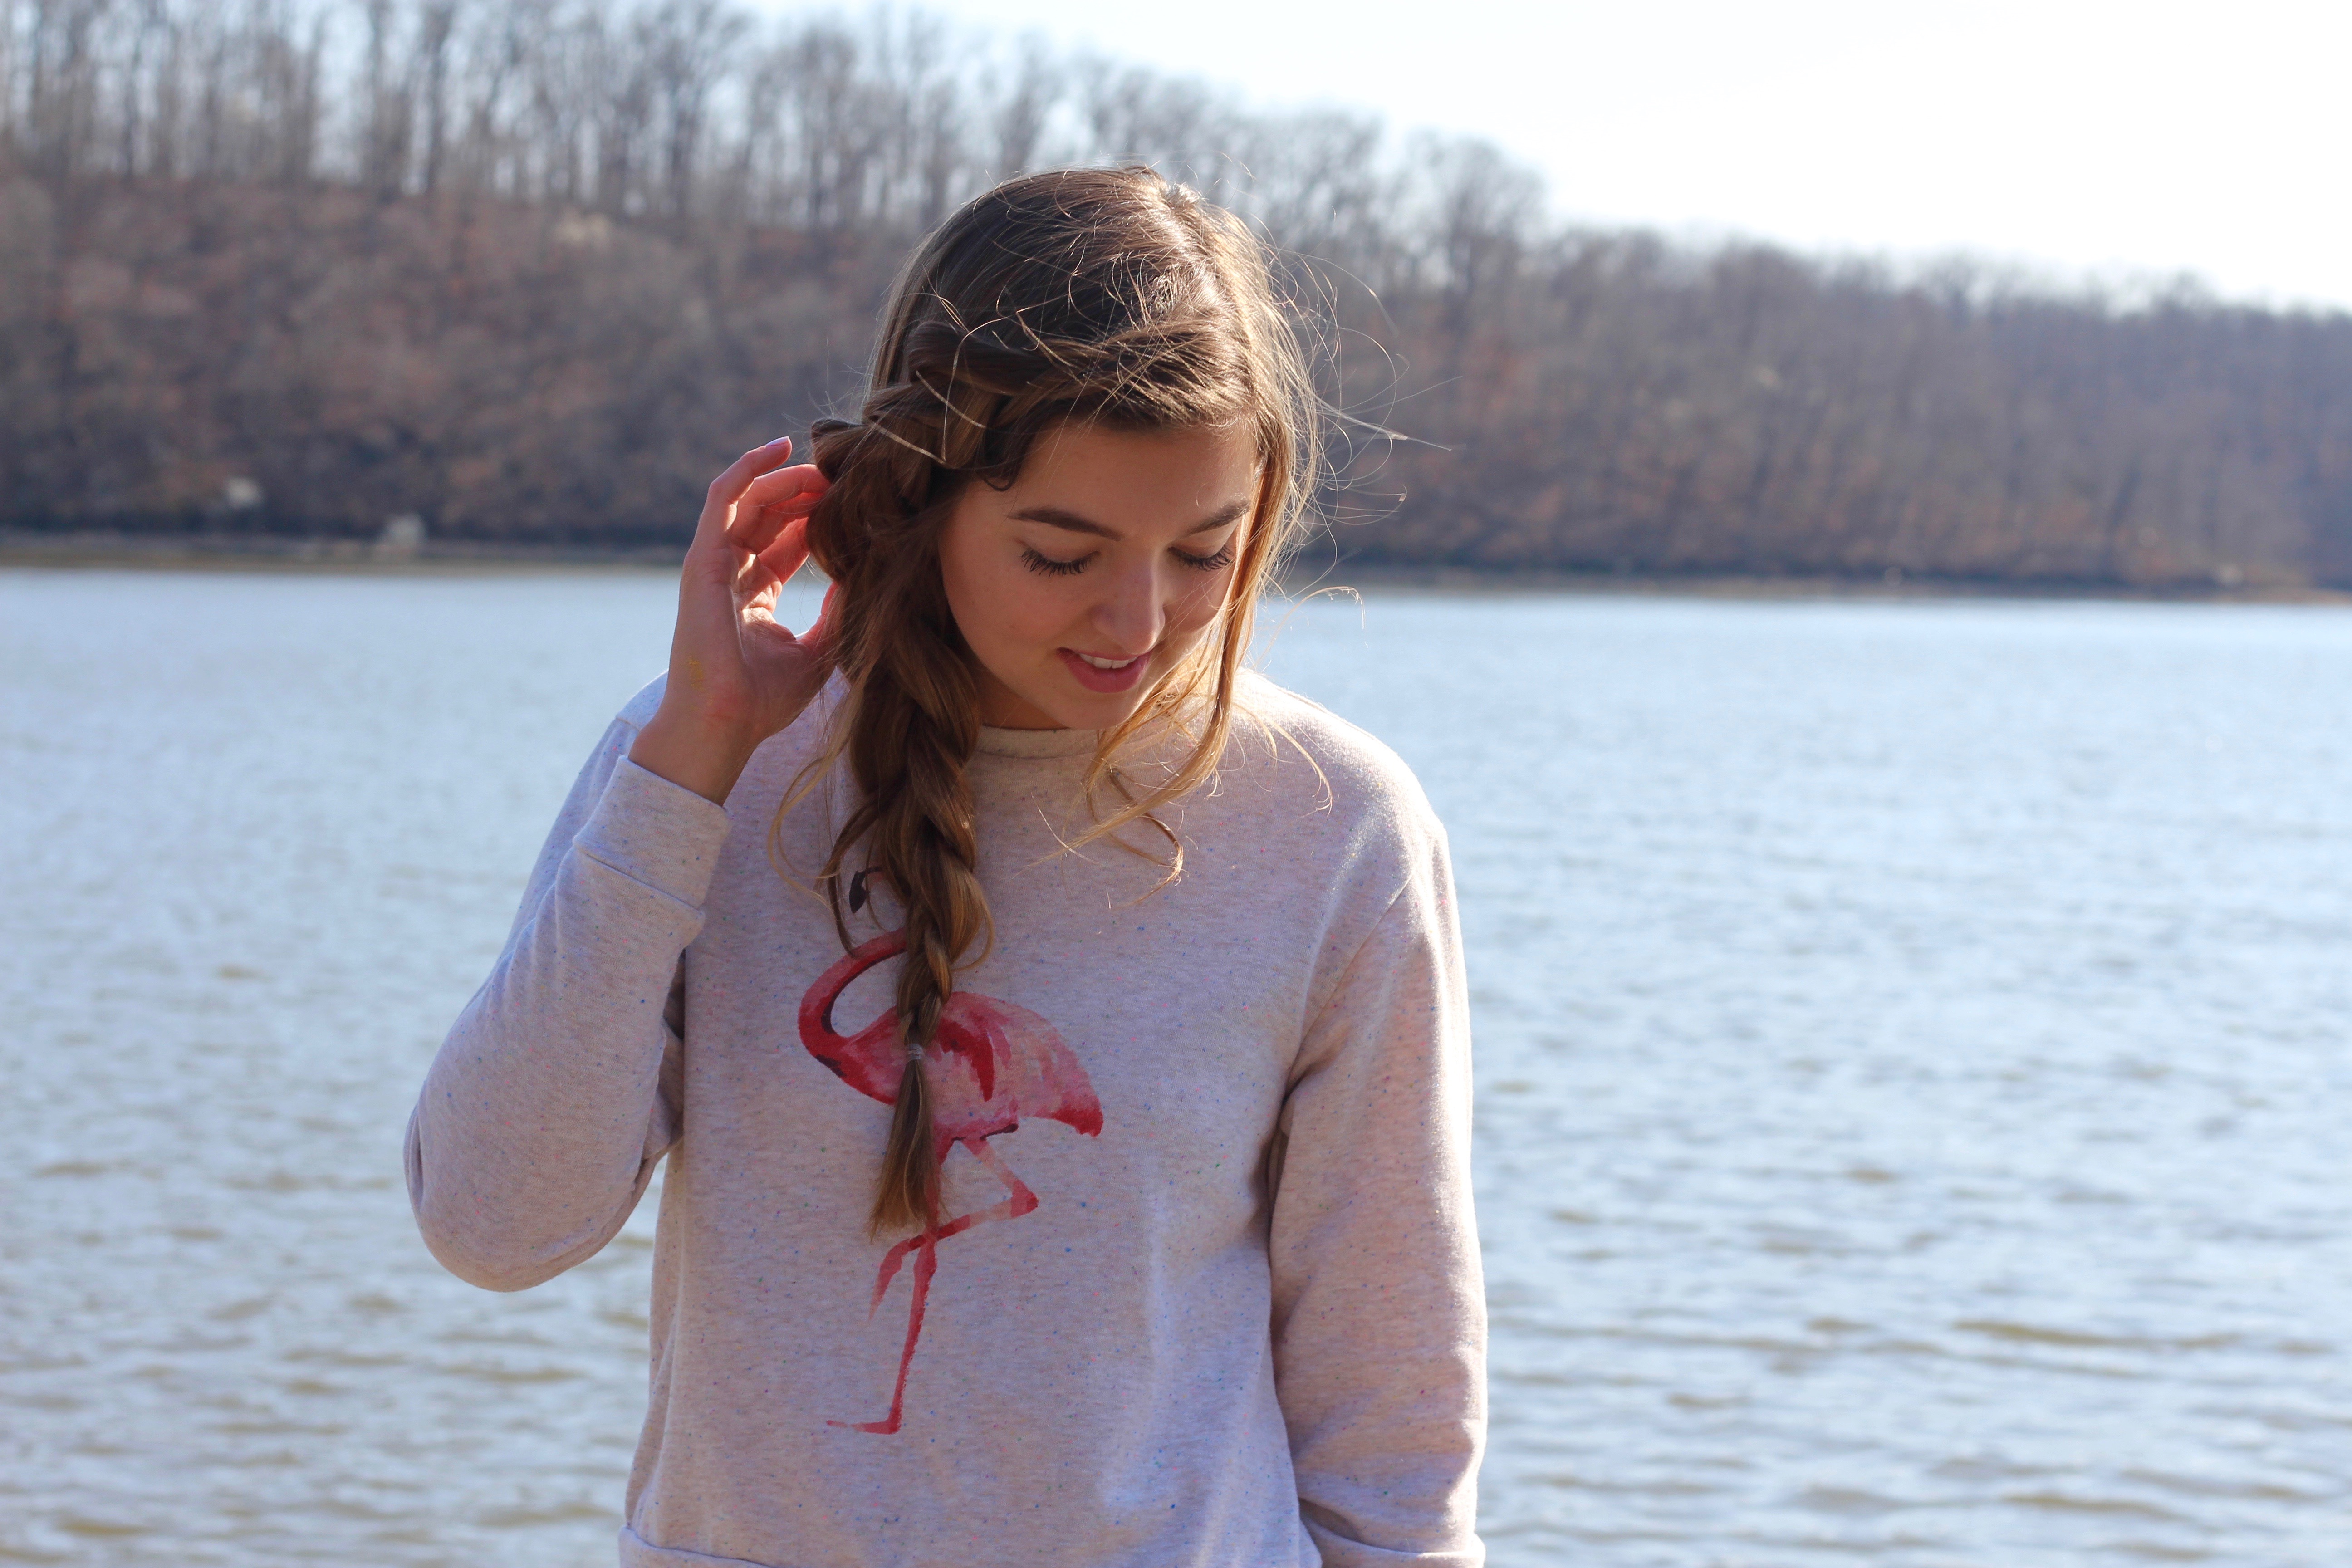 Easter Hair Blog | Side Dutch Braid No Heat Hairstyle (Lake Edition) by Lauren Lindmark on Daily Dose of Charm